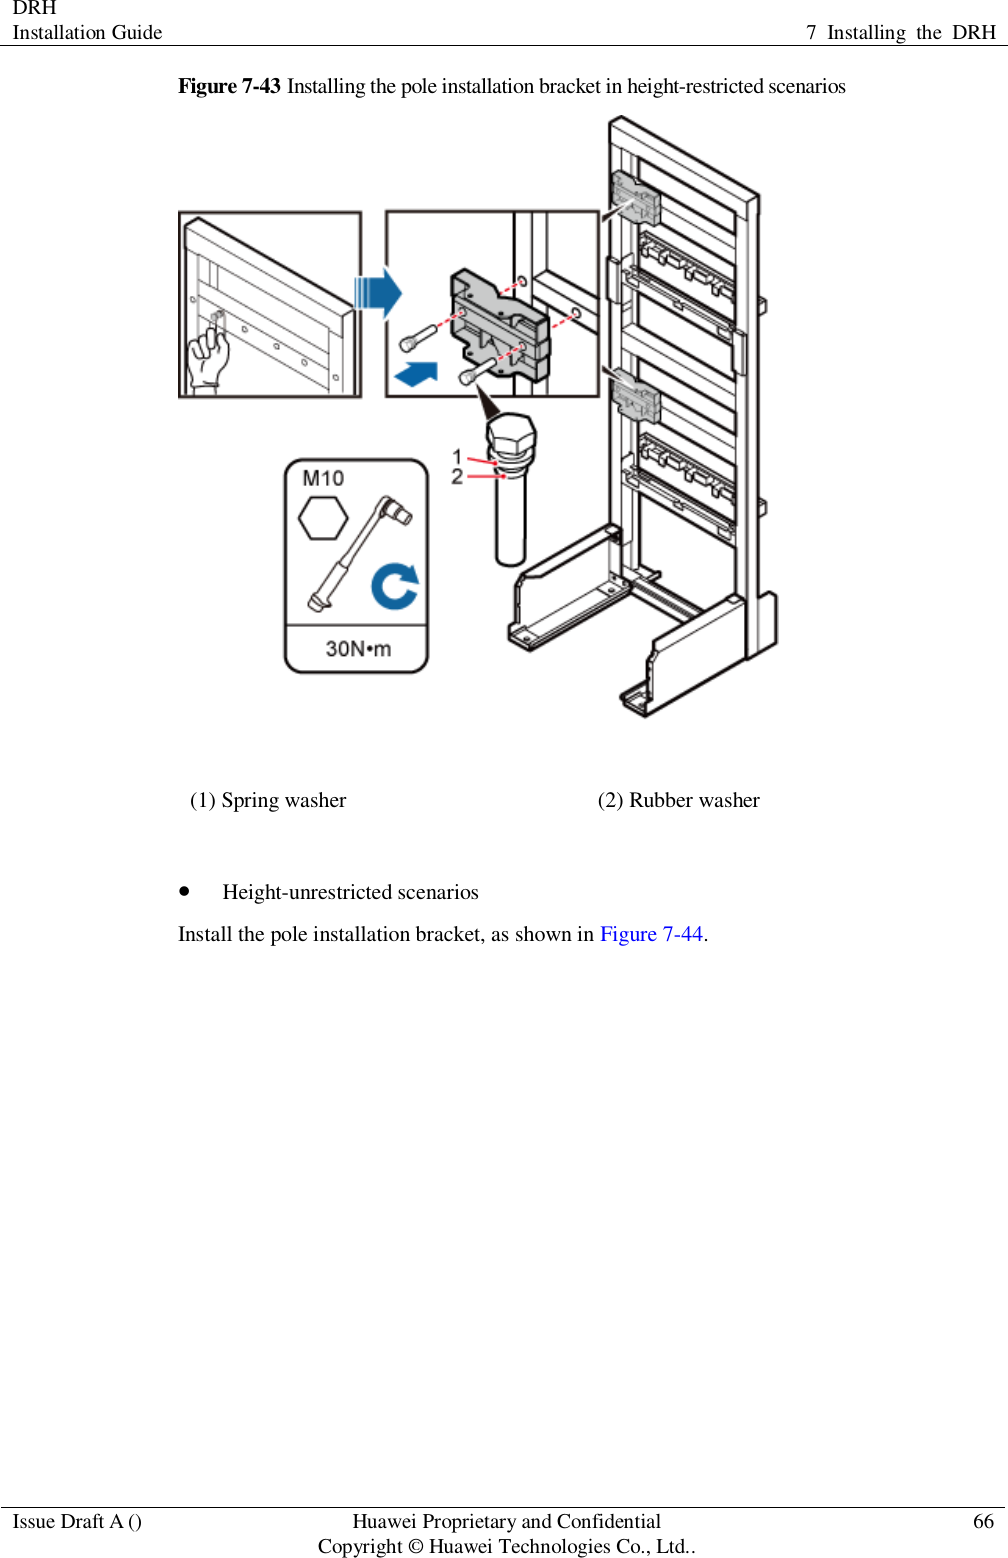 DRH   Installation Guide 7  Installing  the  DRH  Issue Draft A () Huawei Proprietary and Confidential                                     Copyright © Huawei Technologies Co., Ltd.. 66  Figure 7-43 Installing the pole installation bracket in height-restricted scenarios  (1) Spring washer (2) Rubber washer   Height-unrestricted scenarios Install the pole installation bracket, as shown in Figure 7-44. 